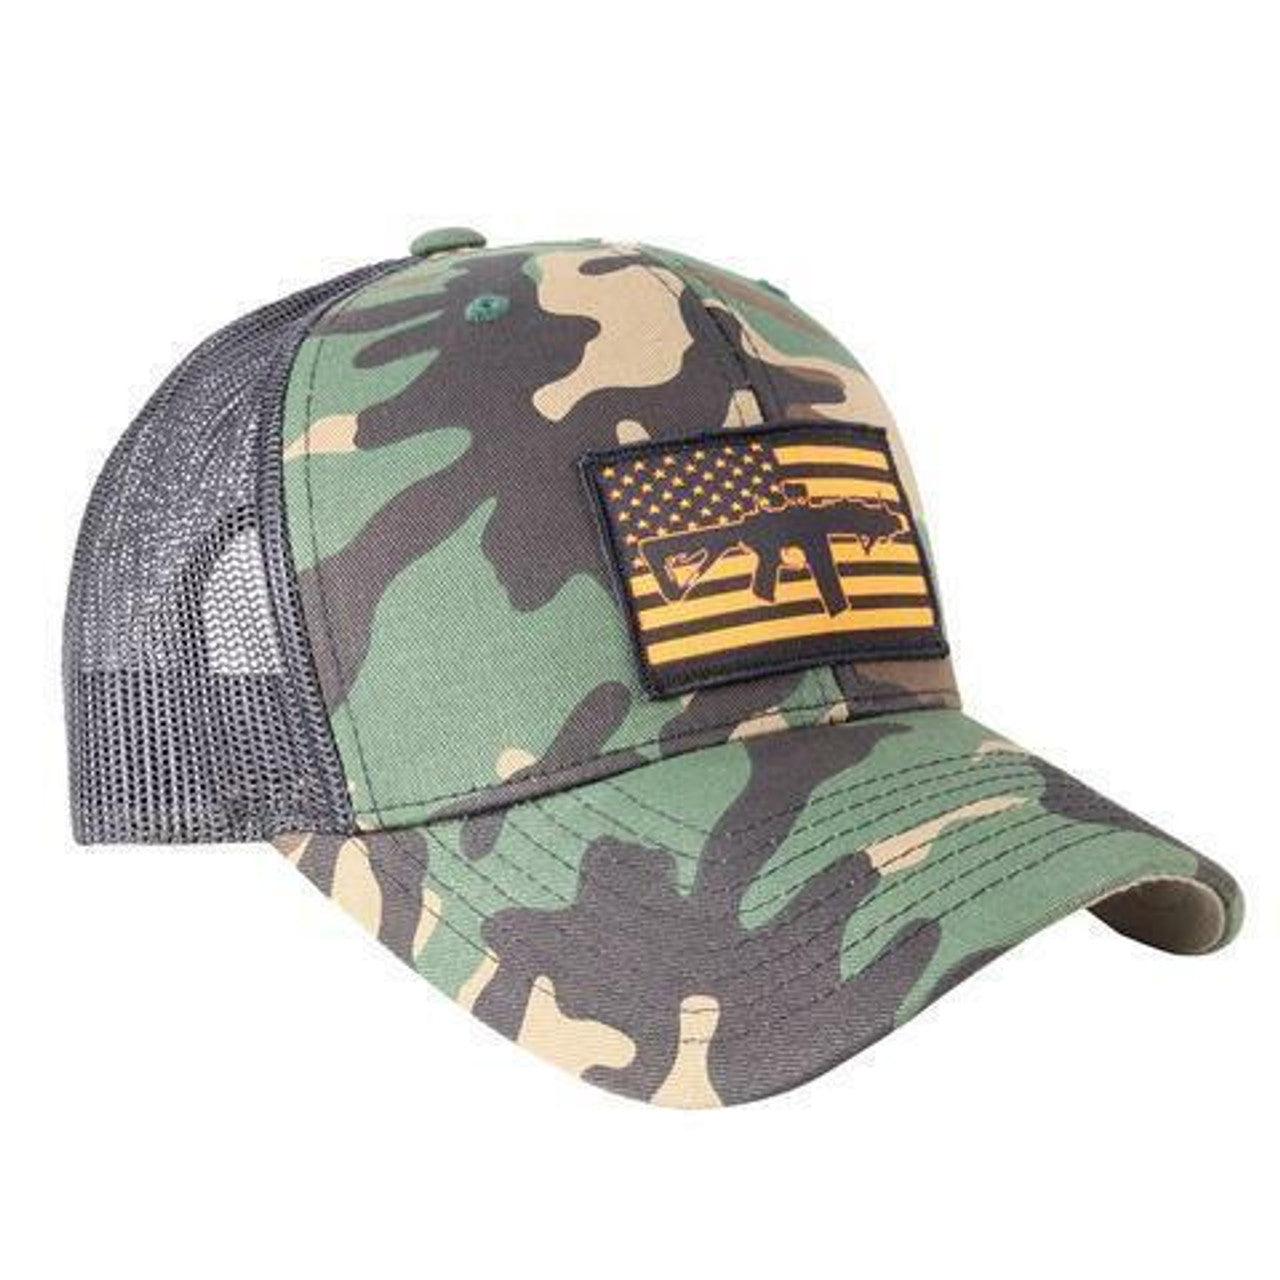 Python Black Camo Hat with American Flag Patch - Blackout Coffee Co.